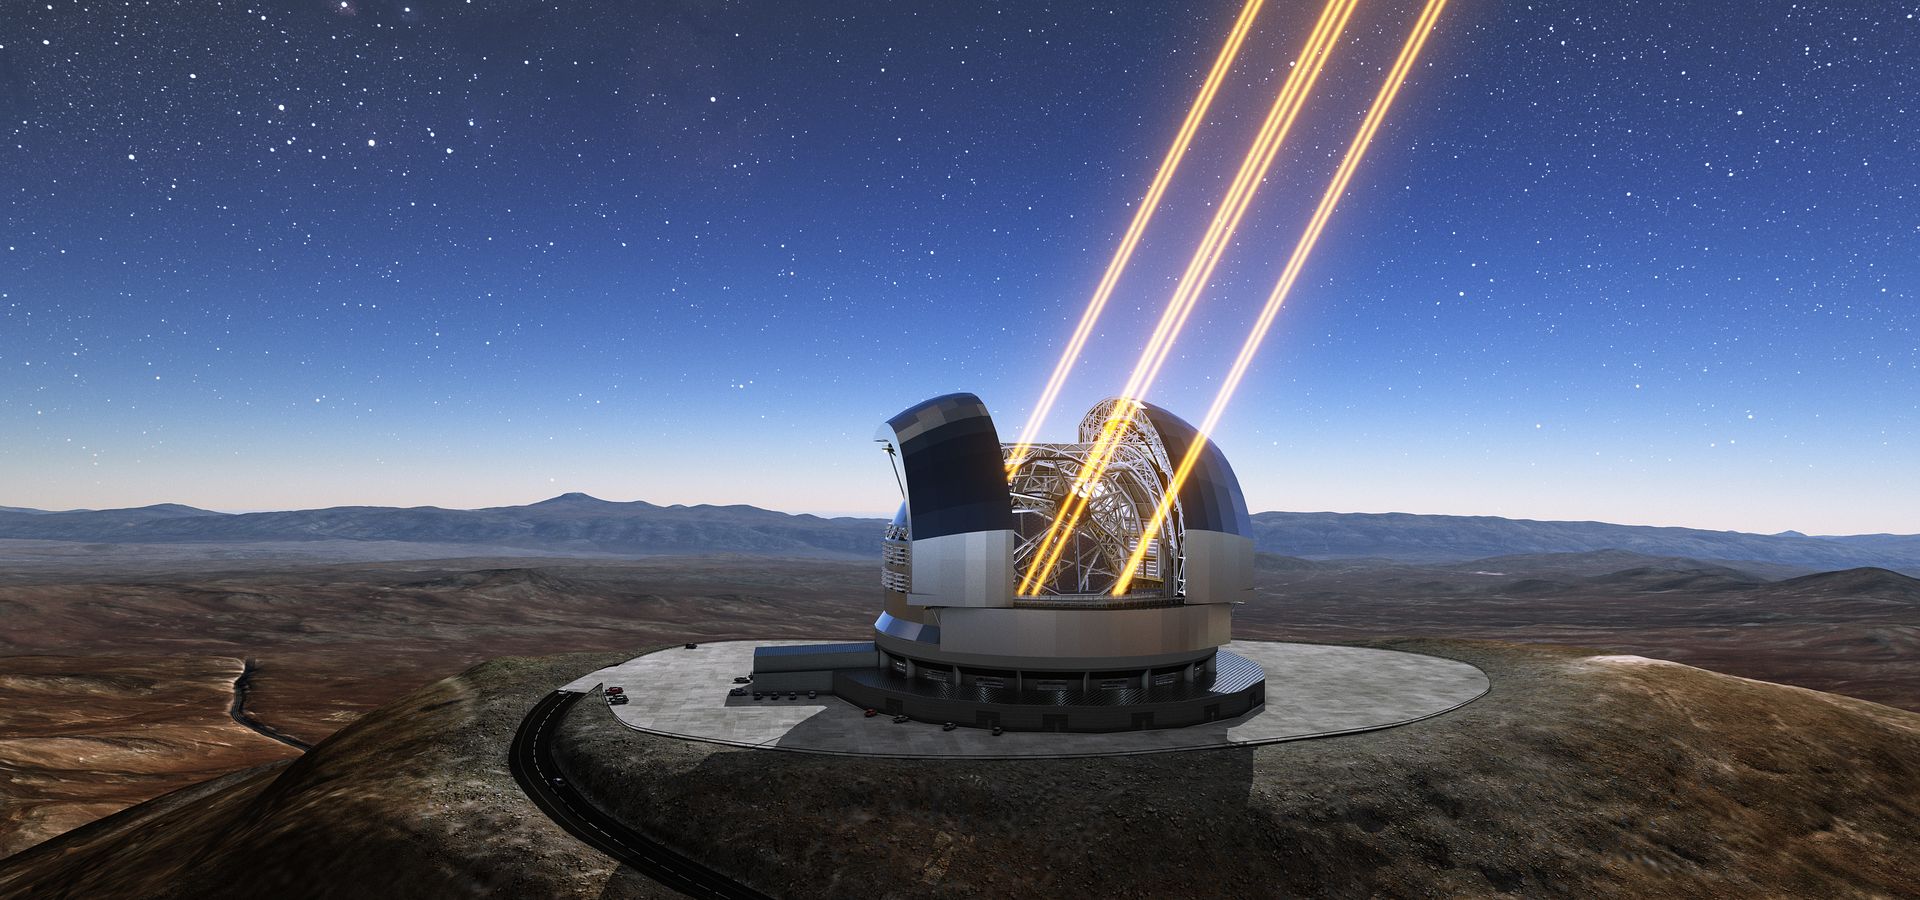 The Extremely large telescope in Chile